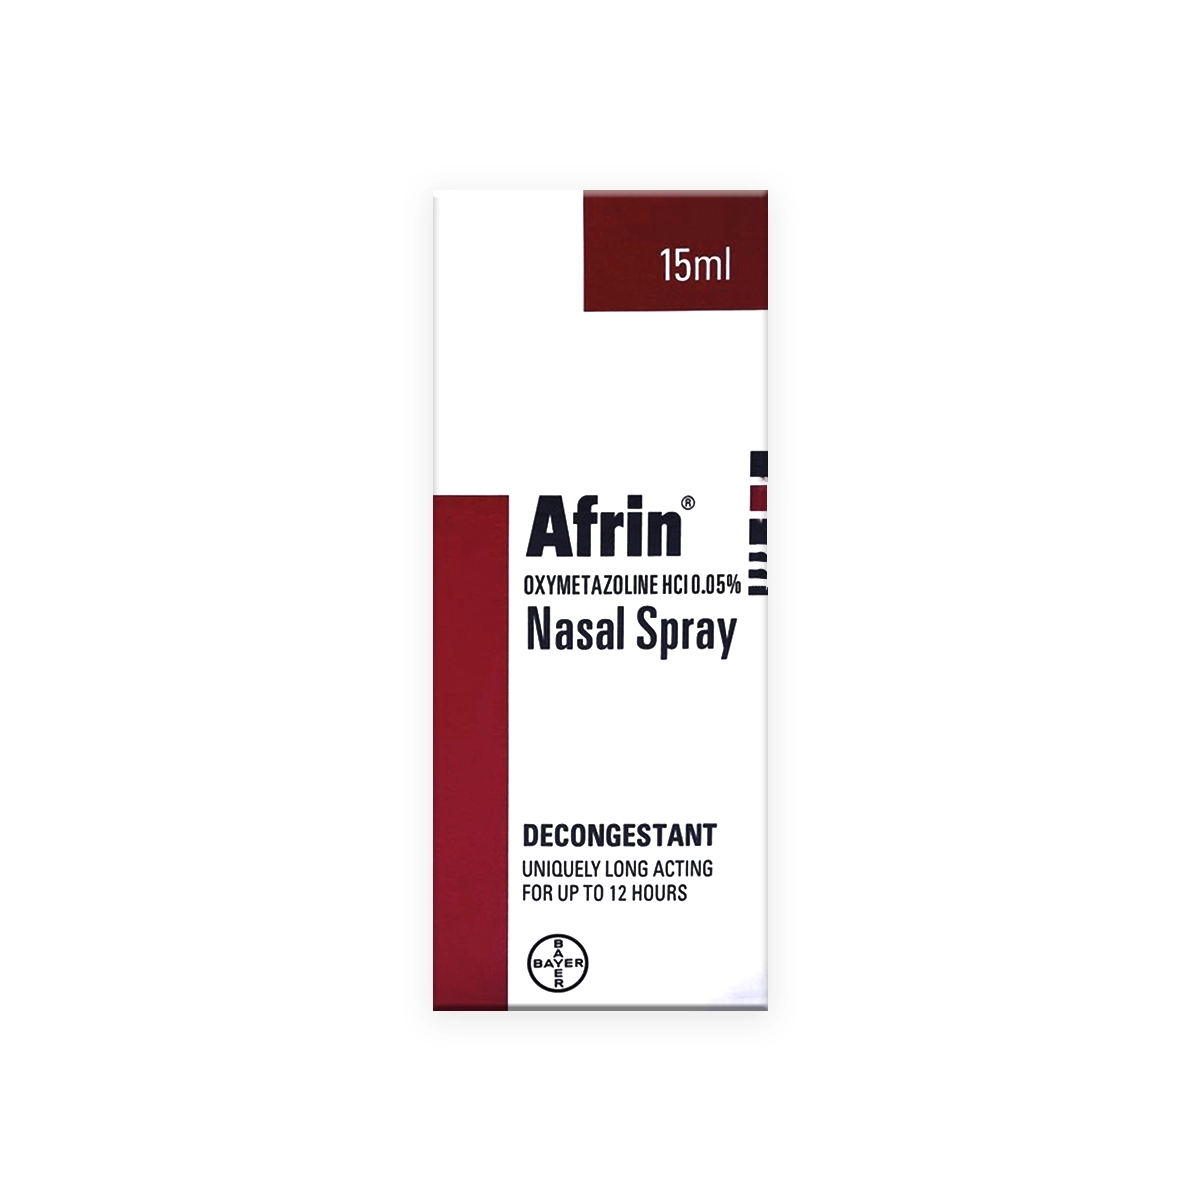 First product image of Afrin nasal spray 15ml (Oxymetazoline)